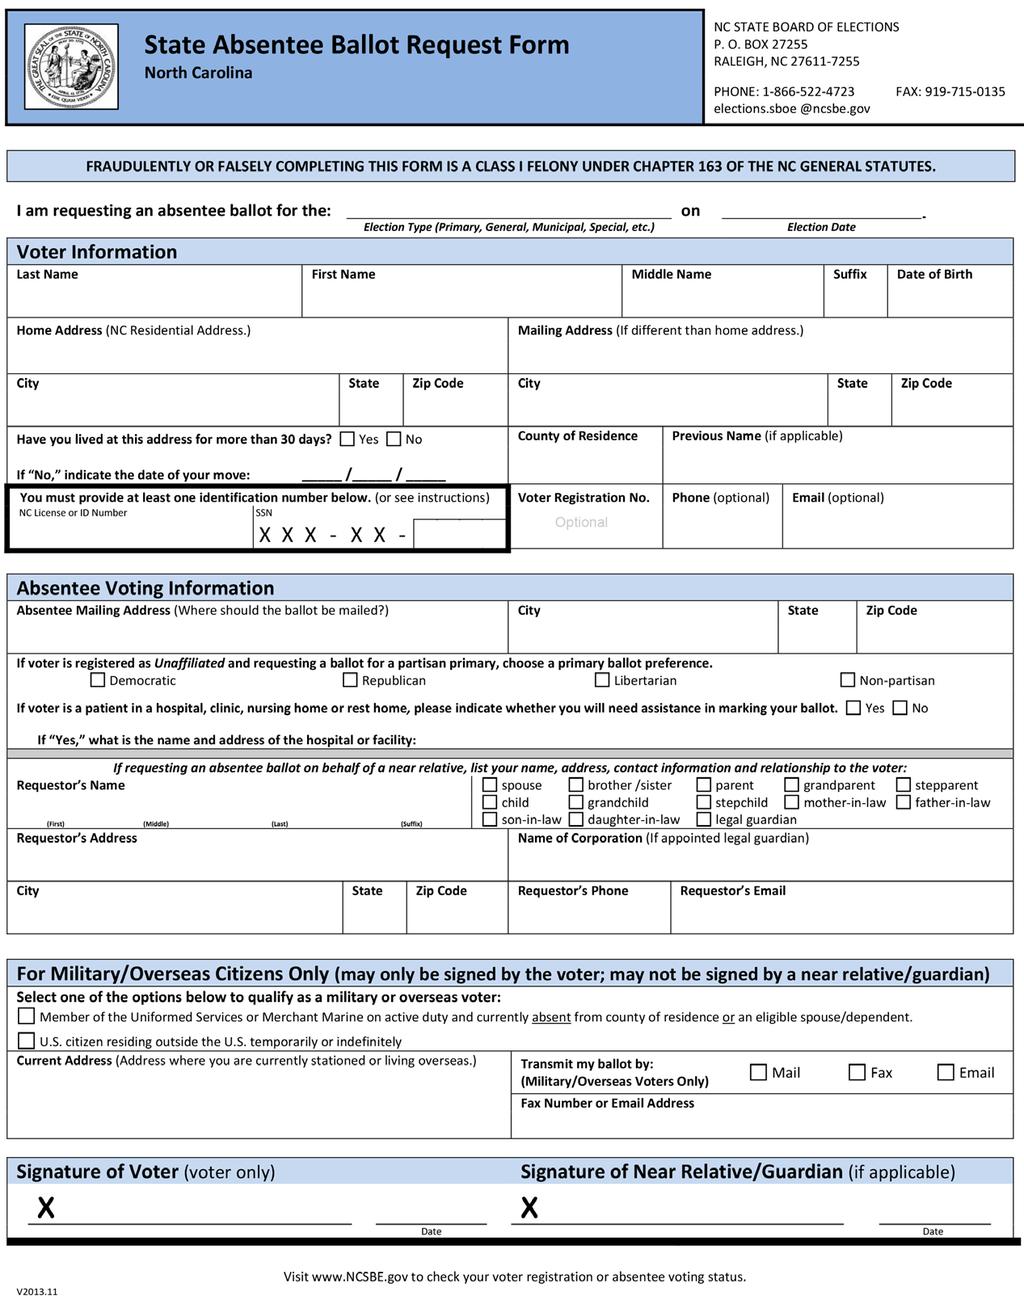 State Ballot Request Form SUBMIT THE FORM This form must be submitted to